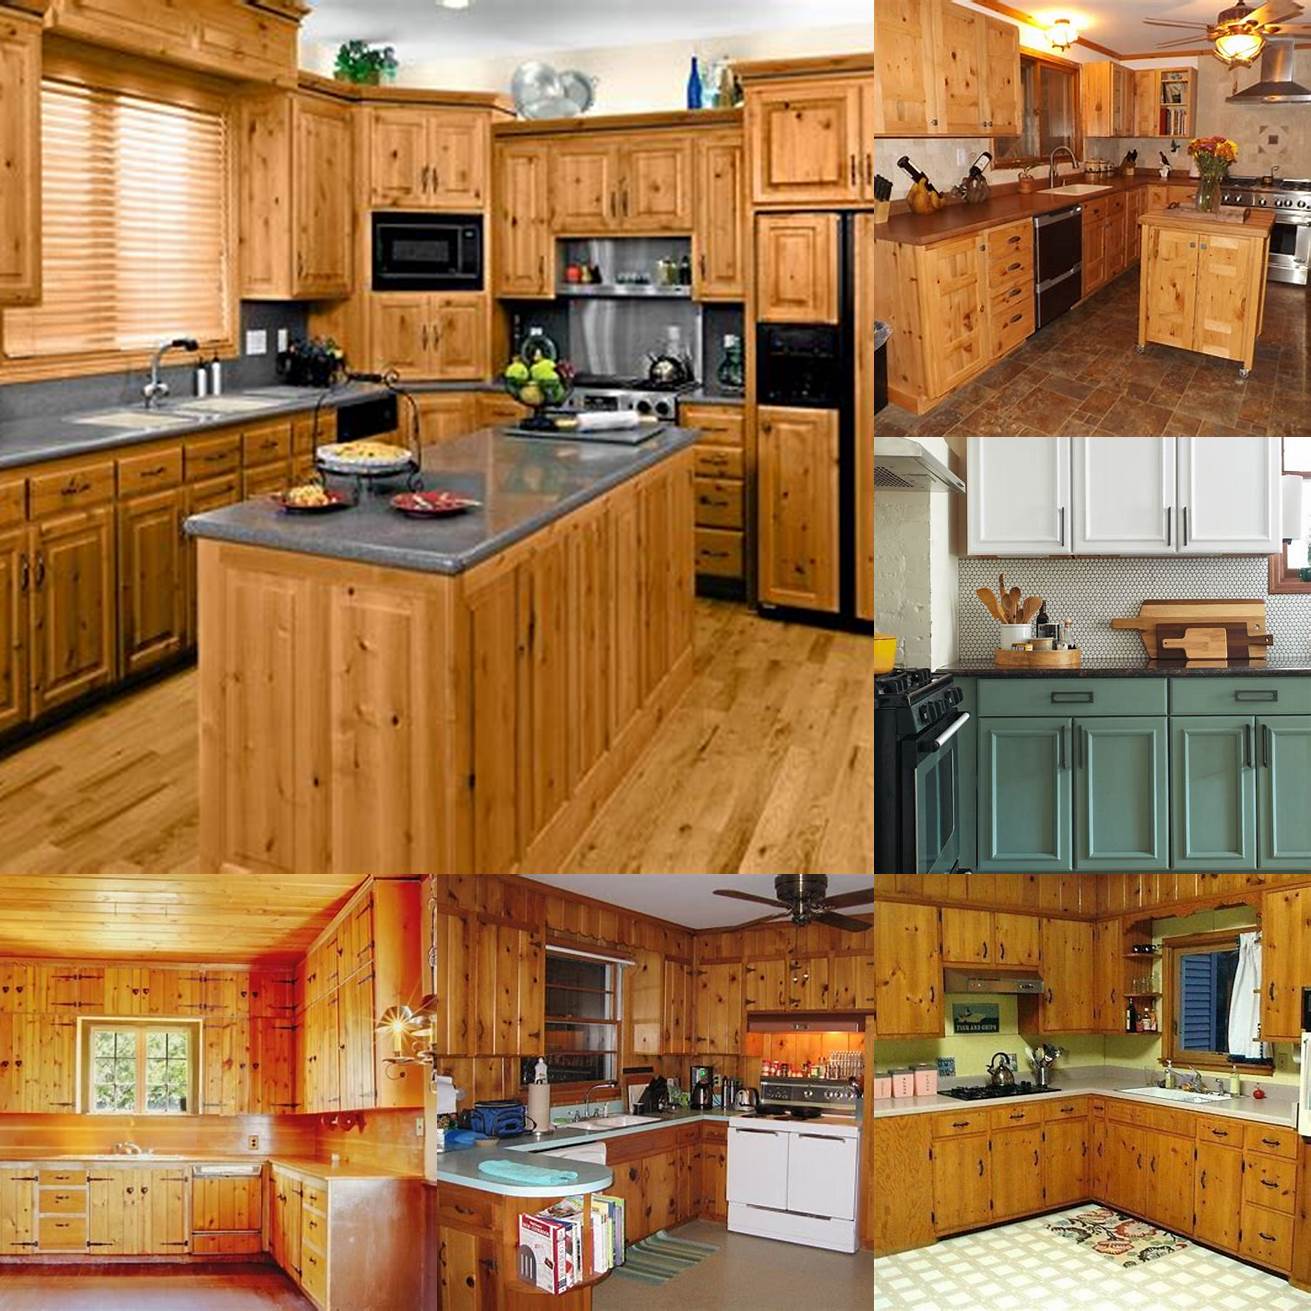 Use as an accent If youre not ready to commit to an entire kitchen full of pine cabinets consider using them as an accent For example you could use pine cabinets on an island or as a feature wall